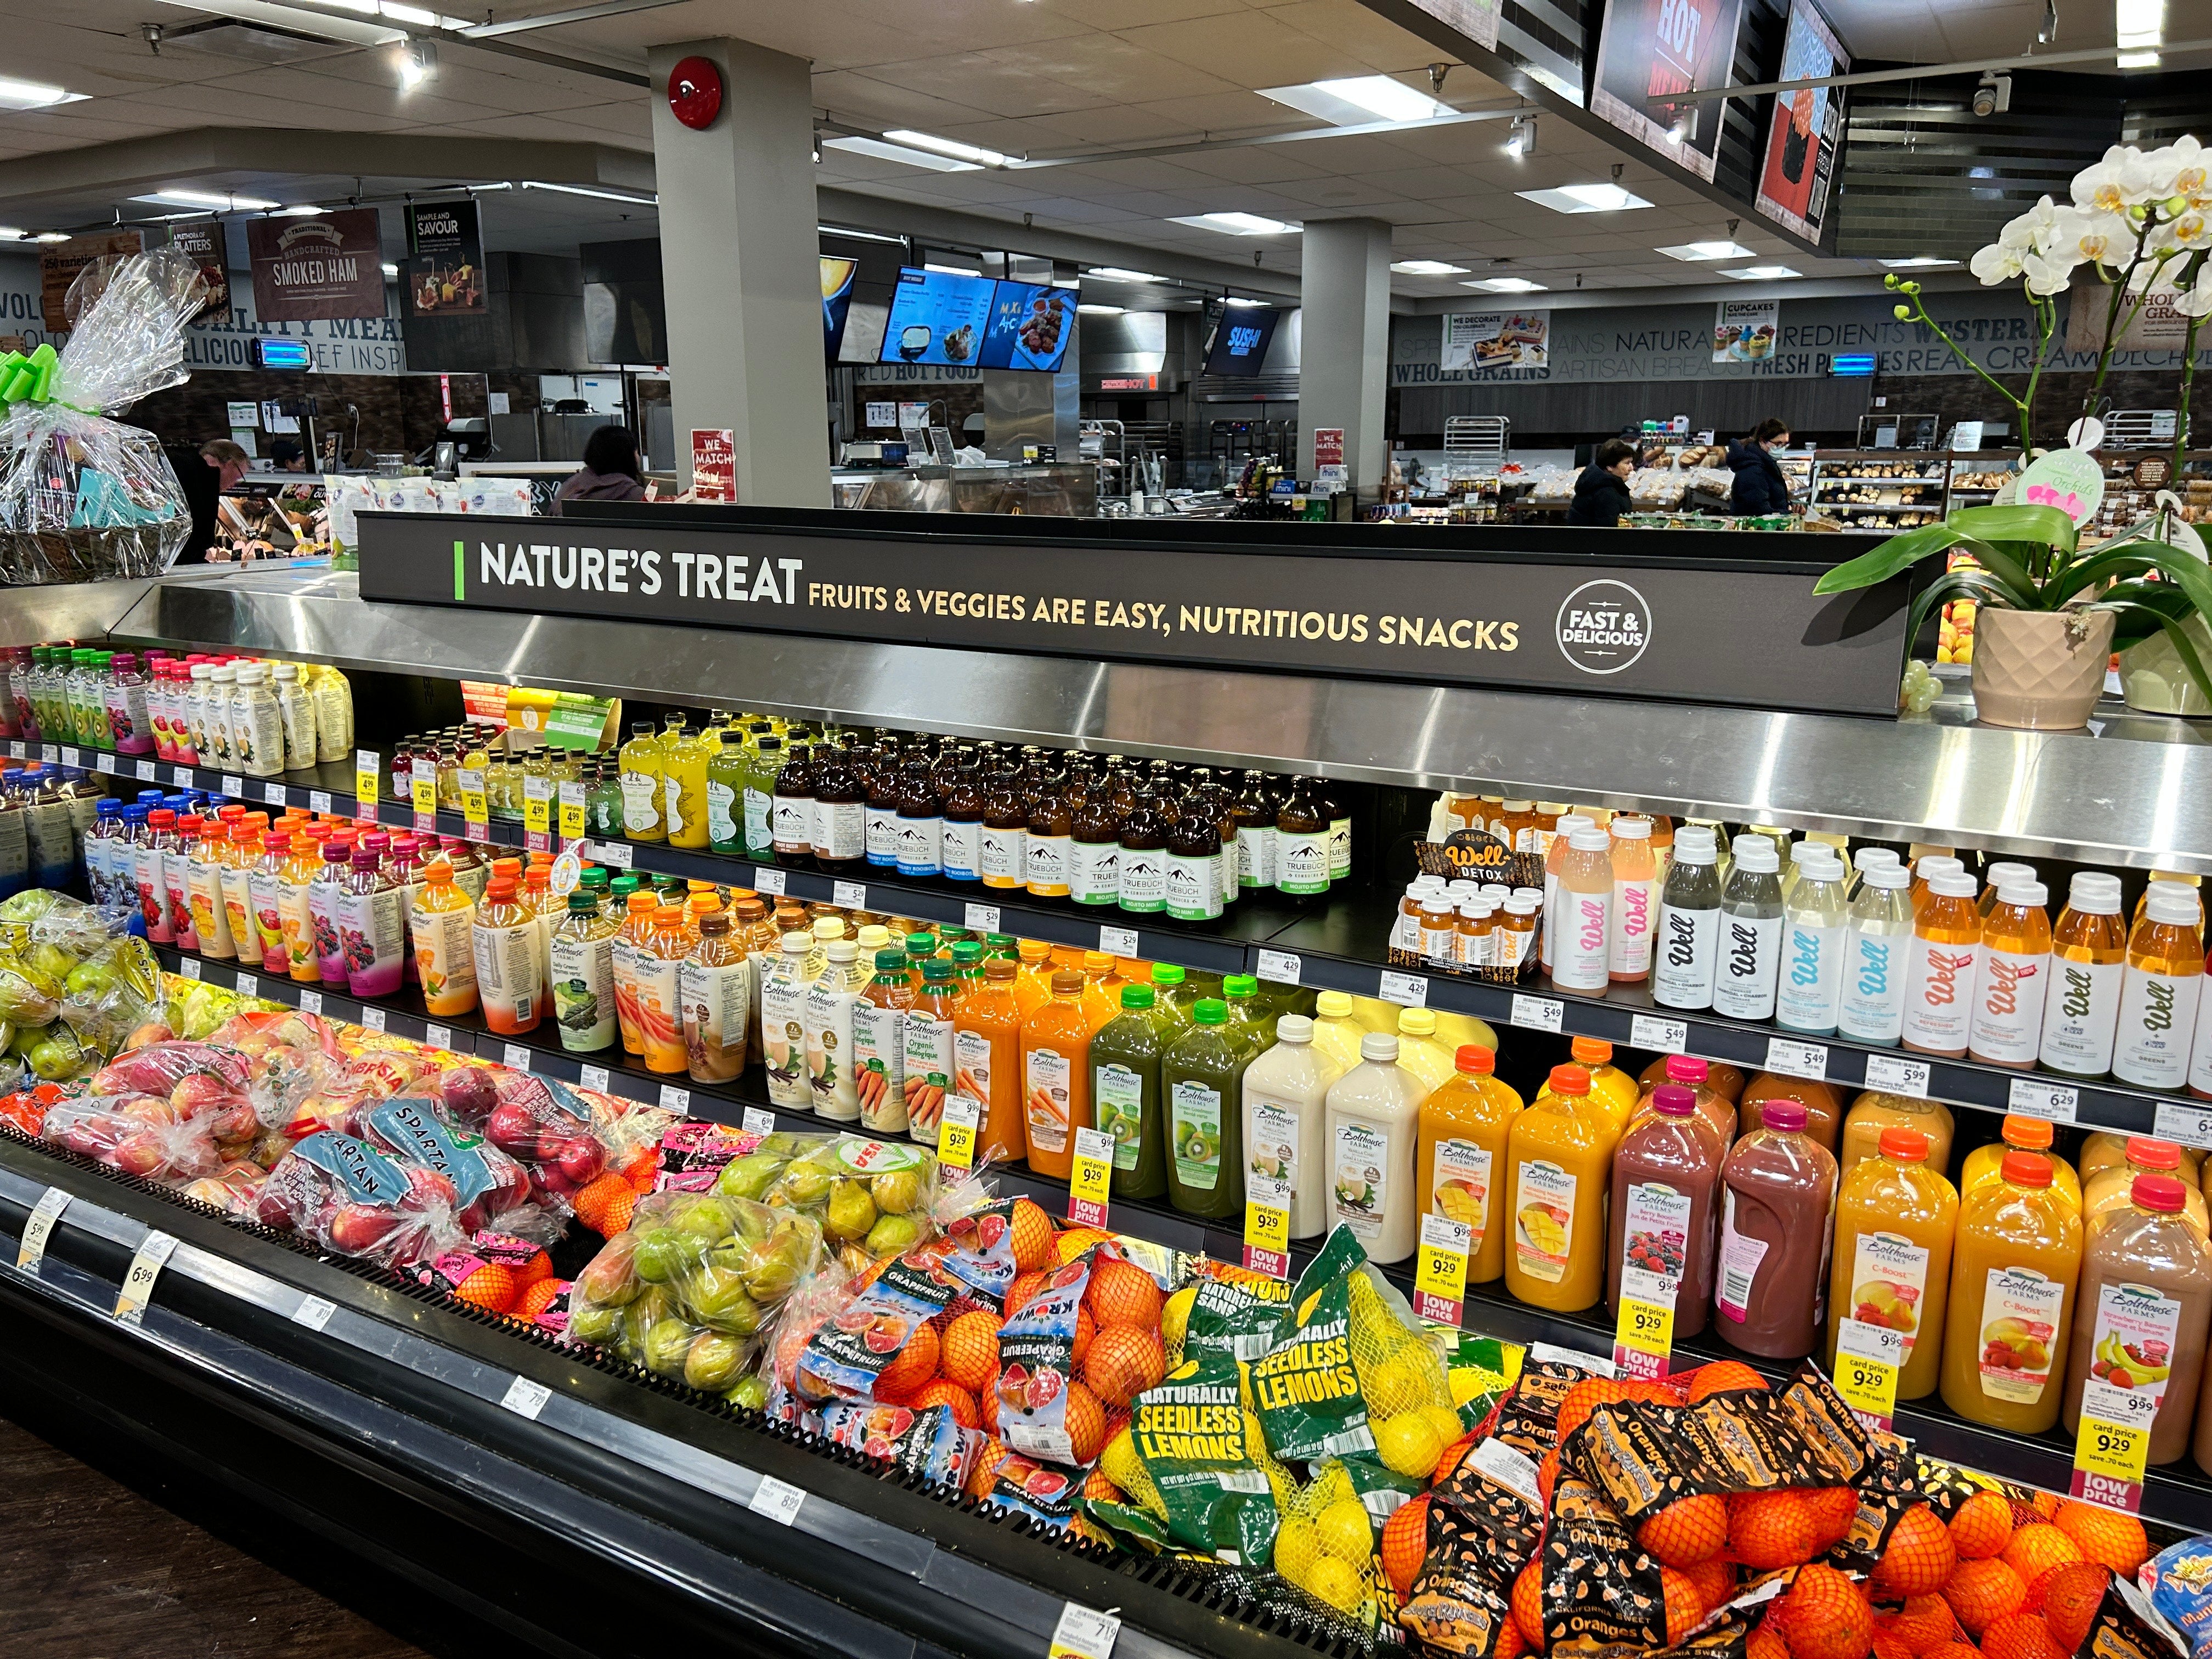 Grocery store display - snacks and drinks